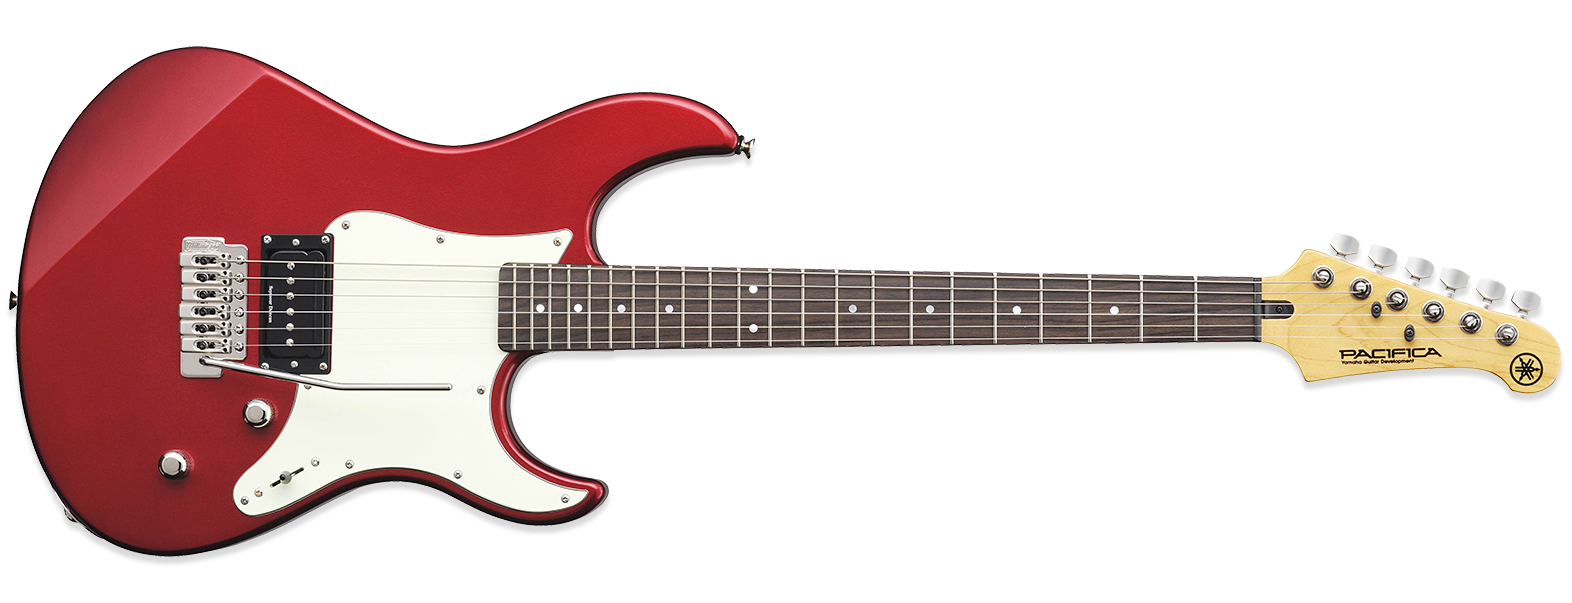 Yamaha-Pacifica-510V-Candy-Apple-Red.png